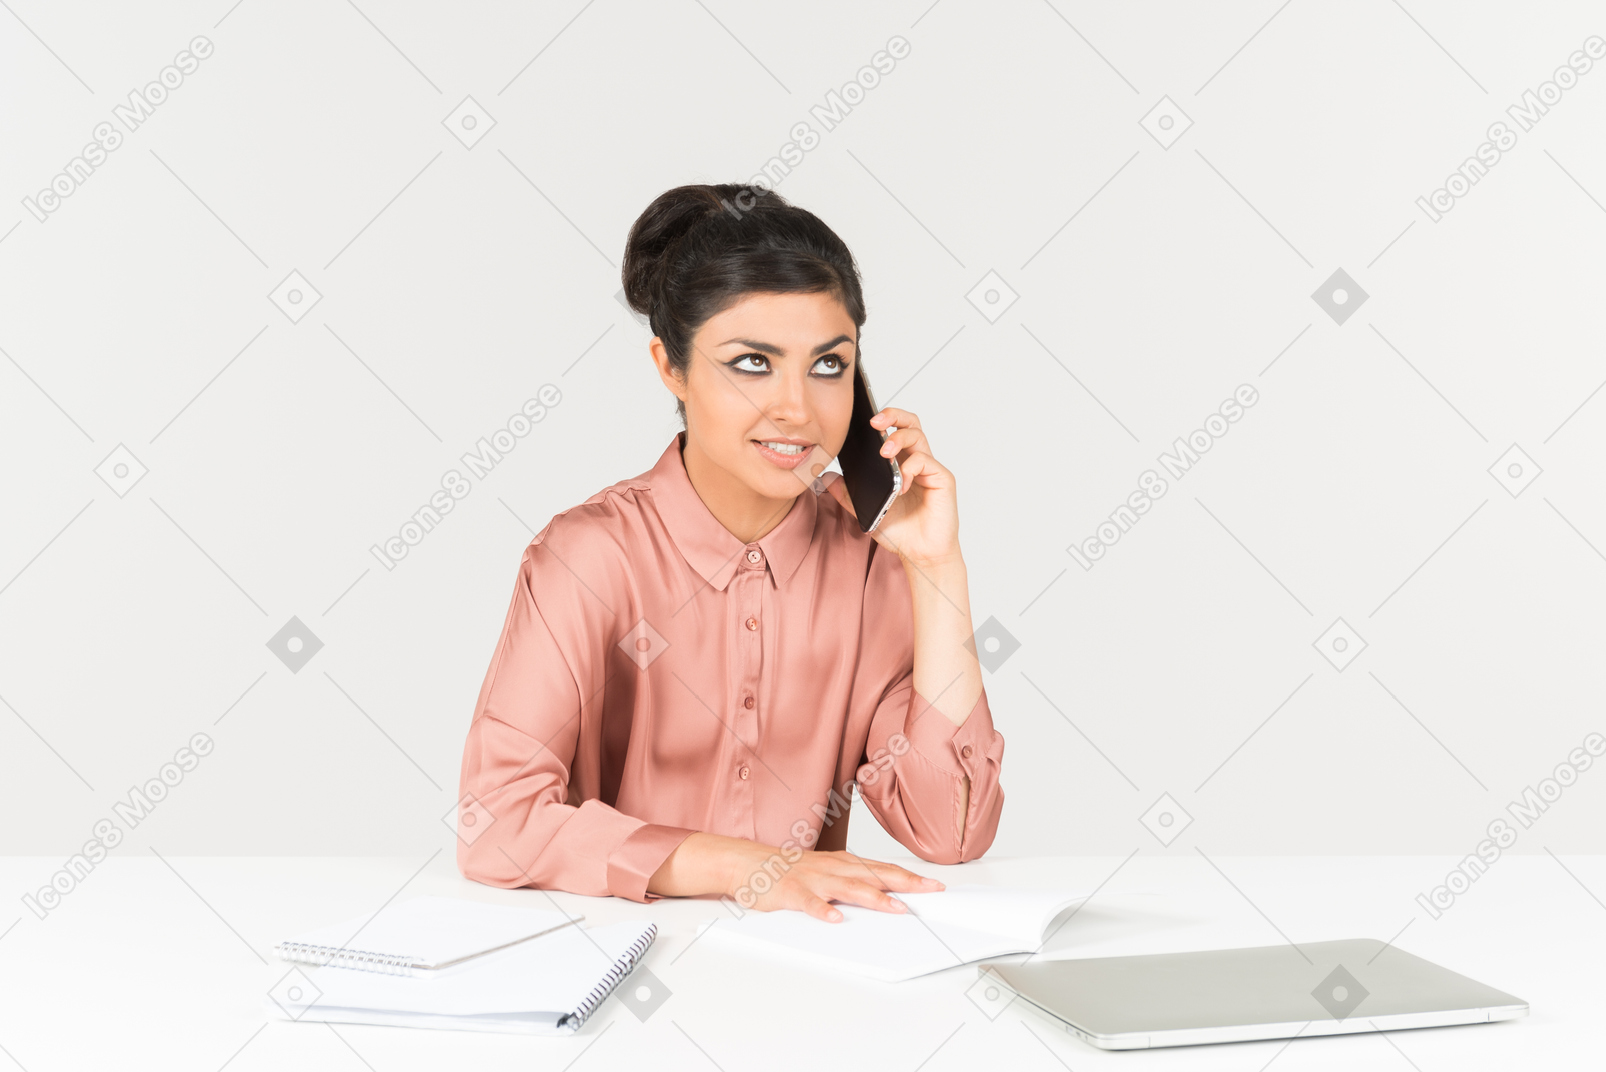 Bothered looking young indian woman talking on the phone and working on laptop